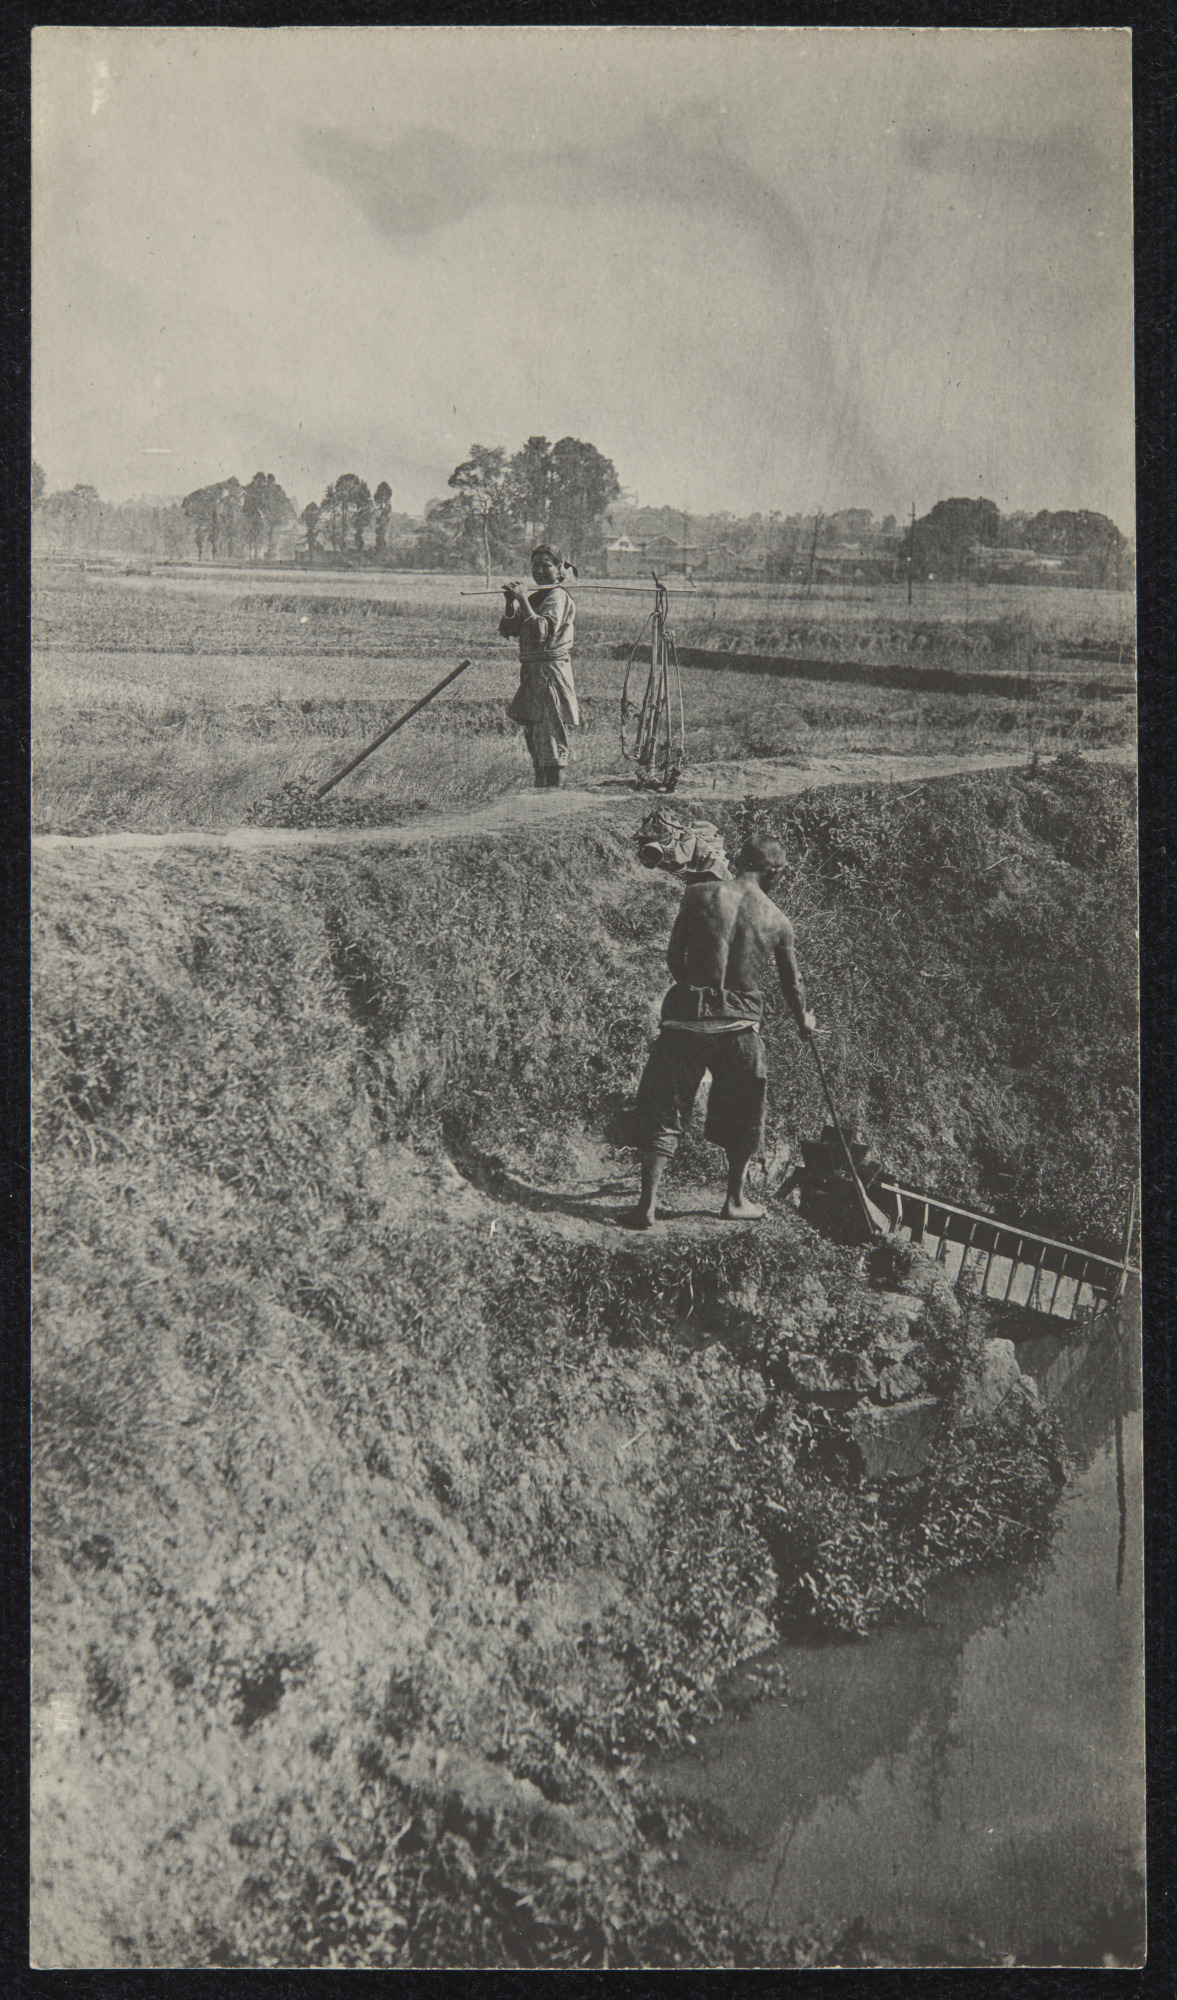 A black and white photograph of two labourers working in a field with water and irrigation devices in the lower right corner of the photograph, 1920.